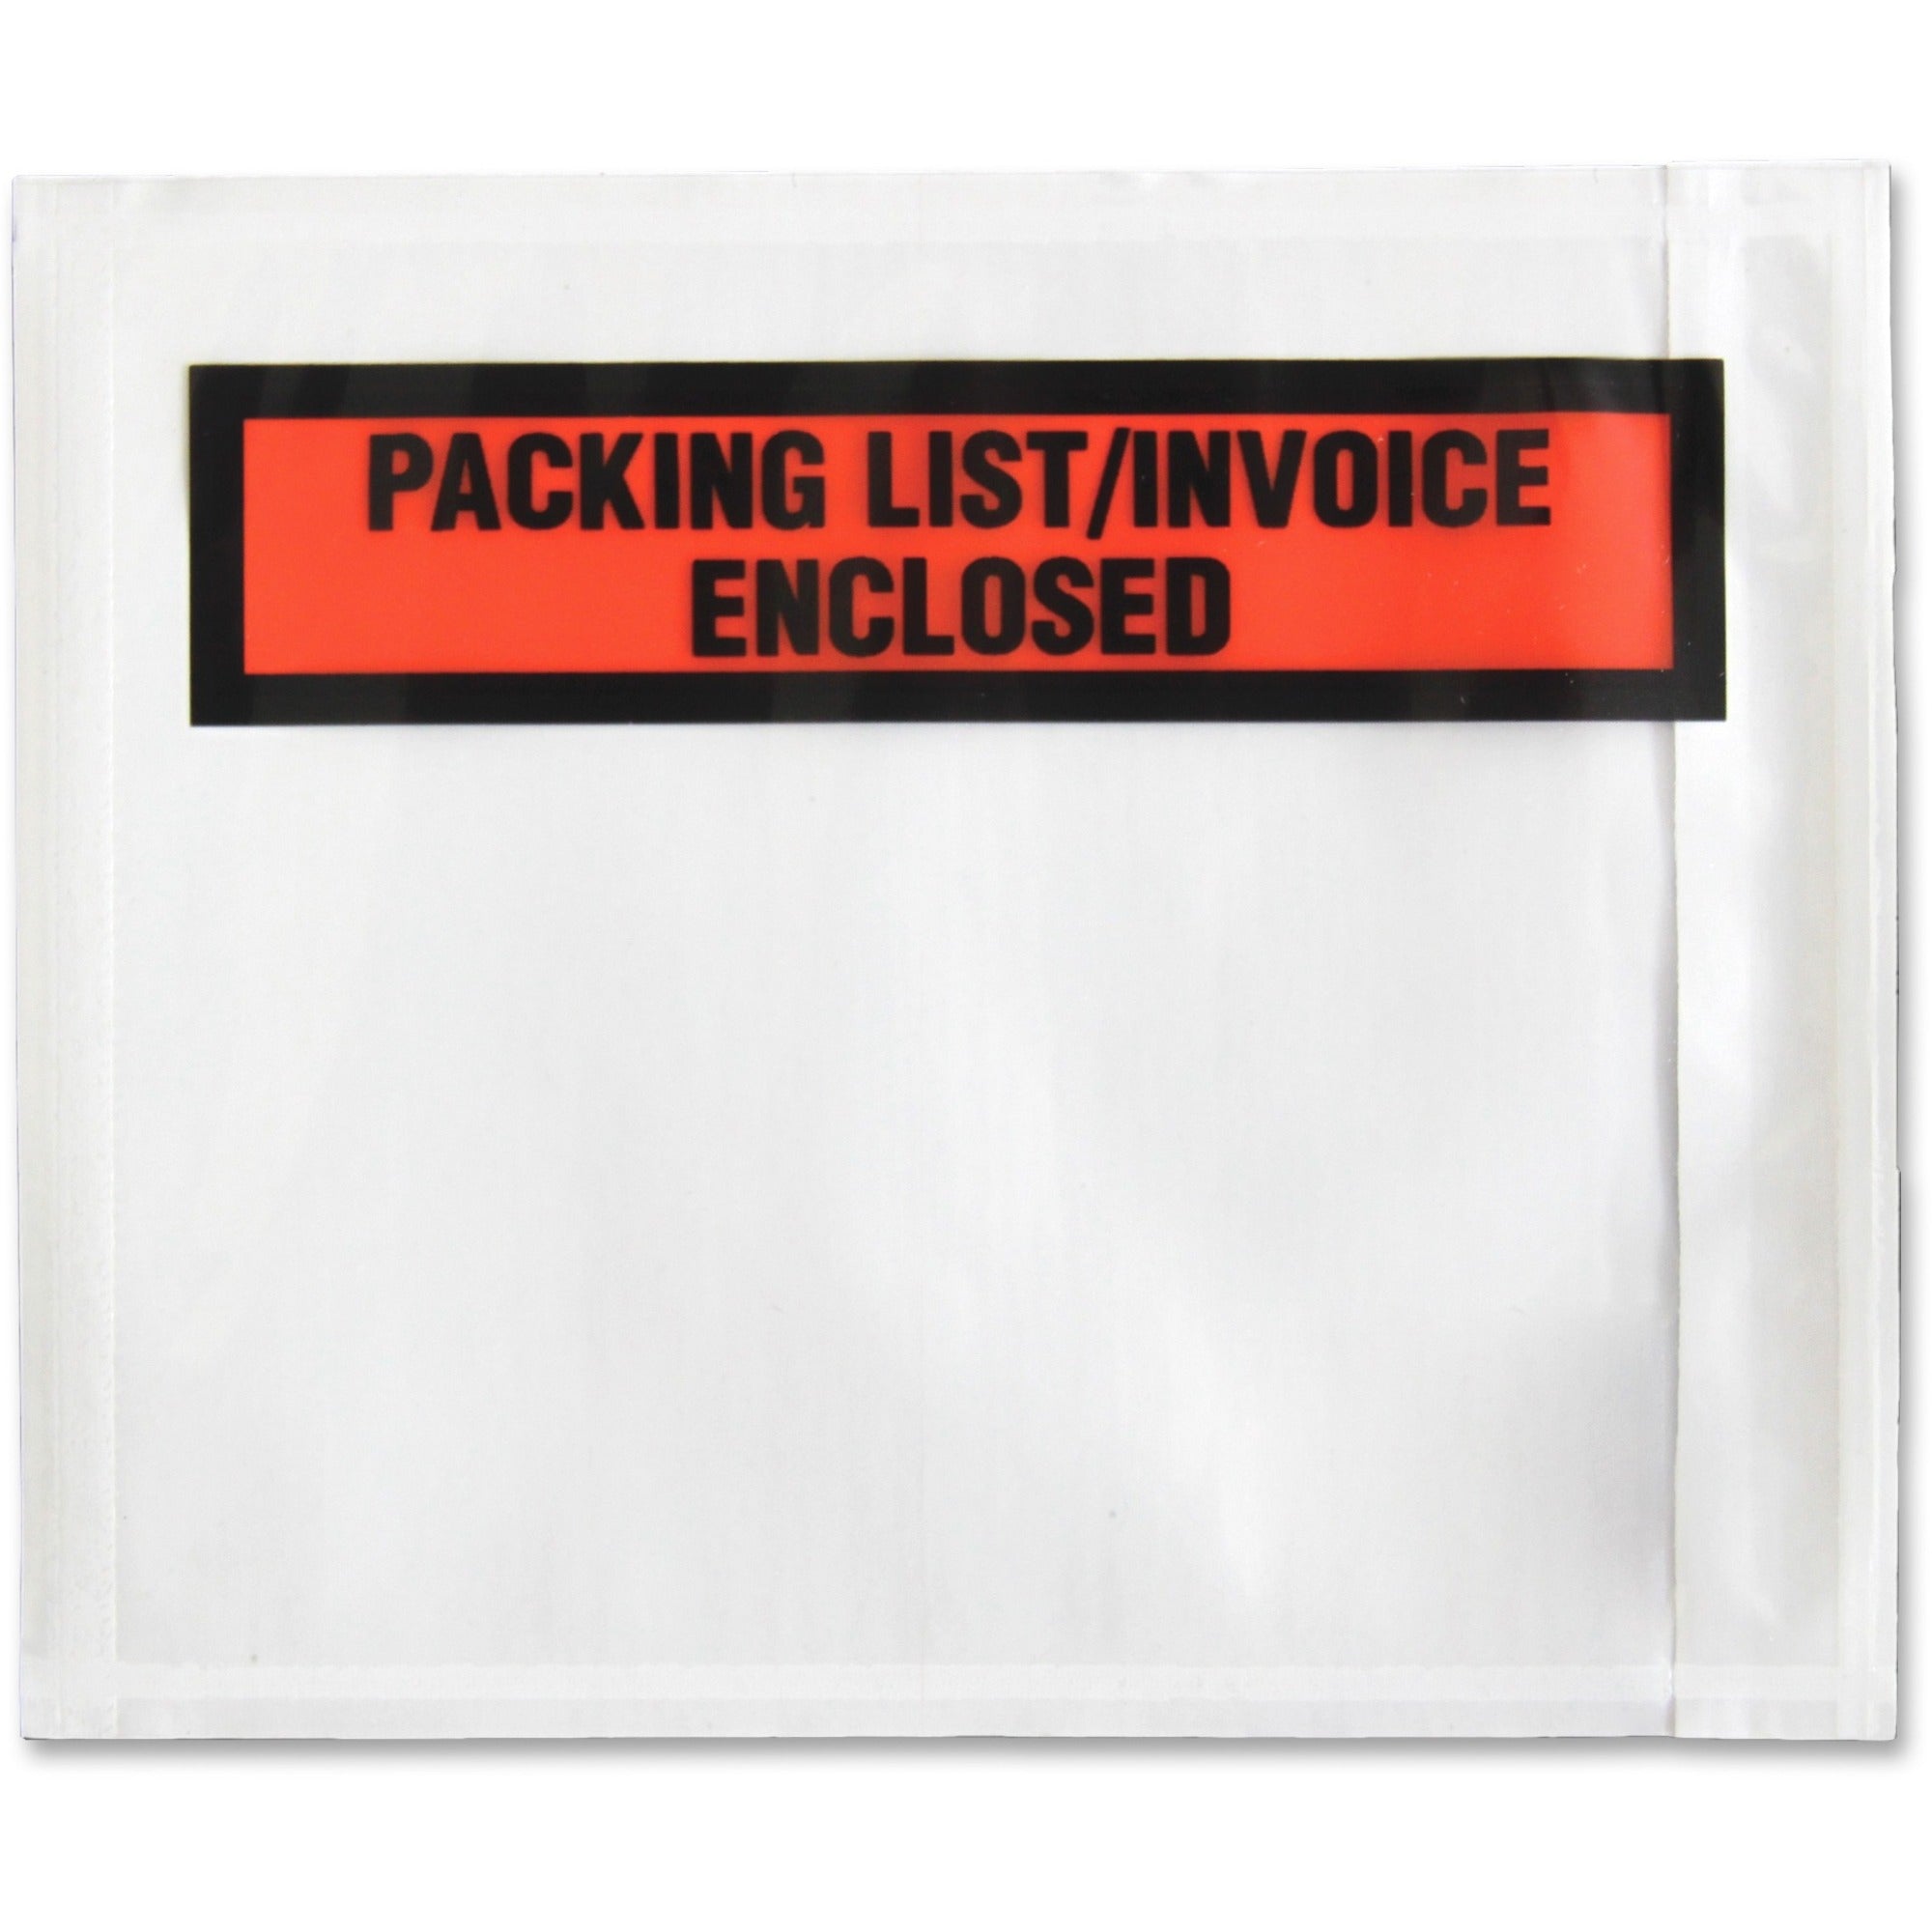 Sparco Pre-Labeled Waterproof Packing Envelopes - Packing List - 4 1/2" Width x 5 1/2" Length - Self-adhesive Seal - Low Density Polyethylene (LDPE) - 1000 / Box - White - 